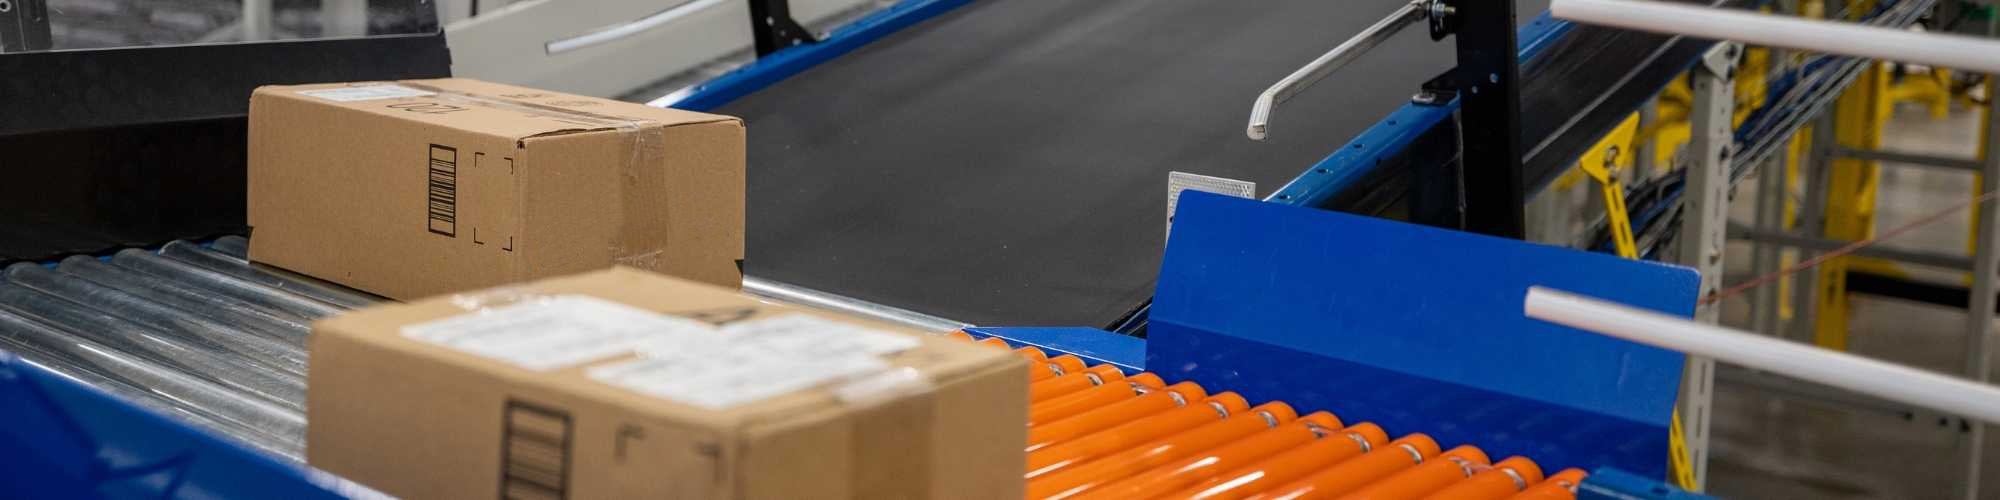 packages enter conveyor belt for eCommerce fulfillment automation